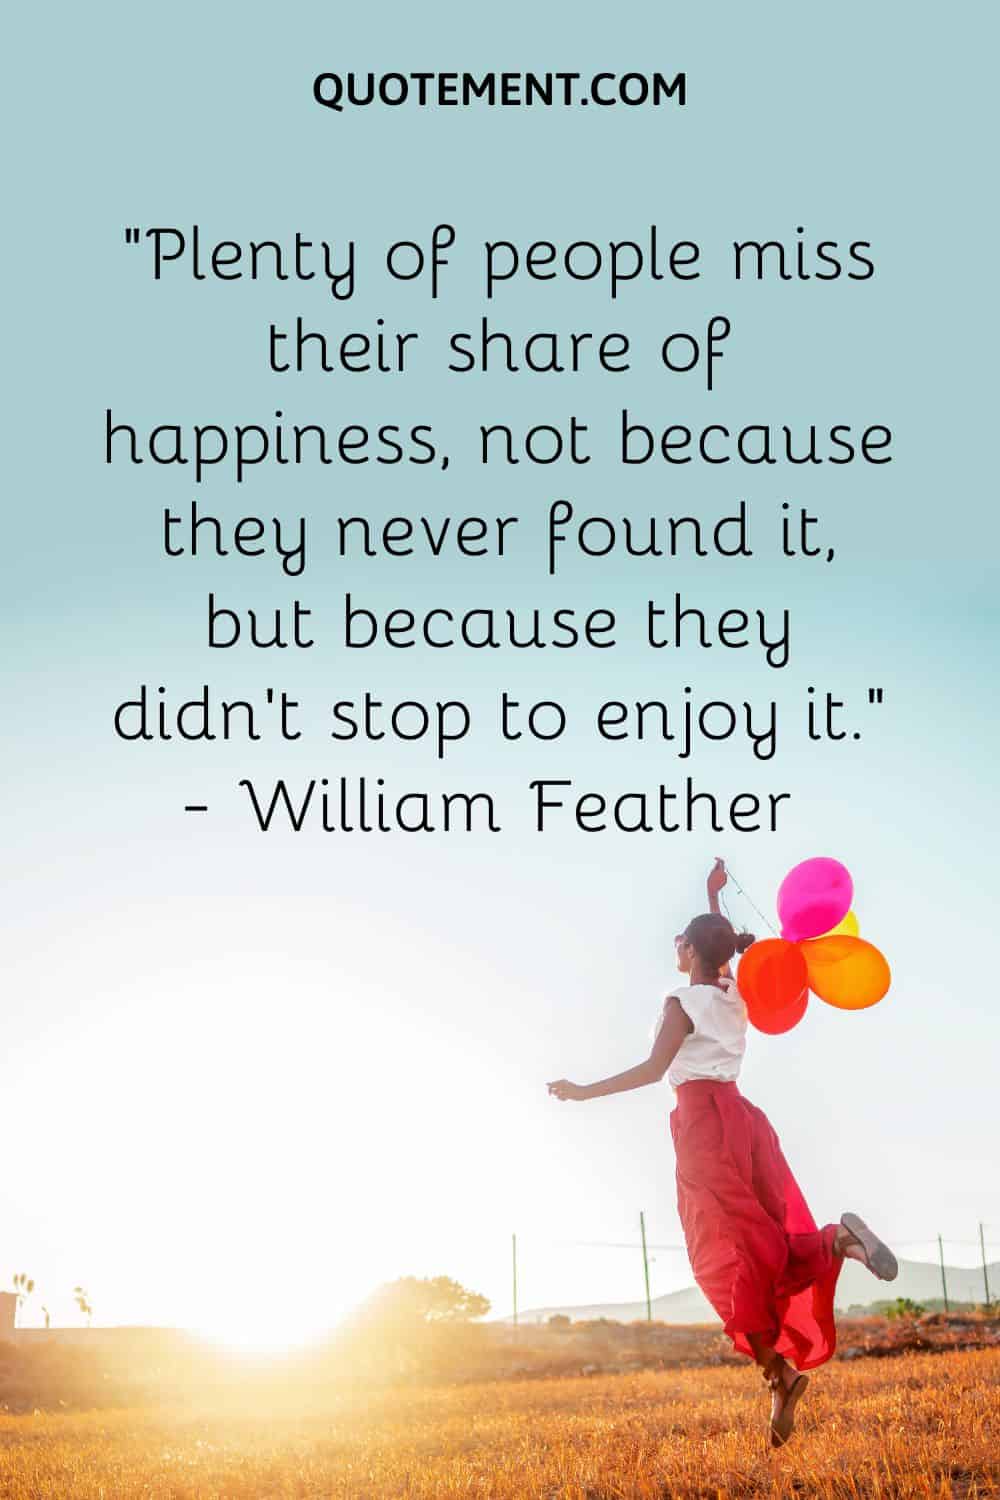 Plenty of people miss their share of happiness